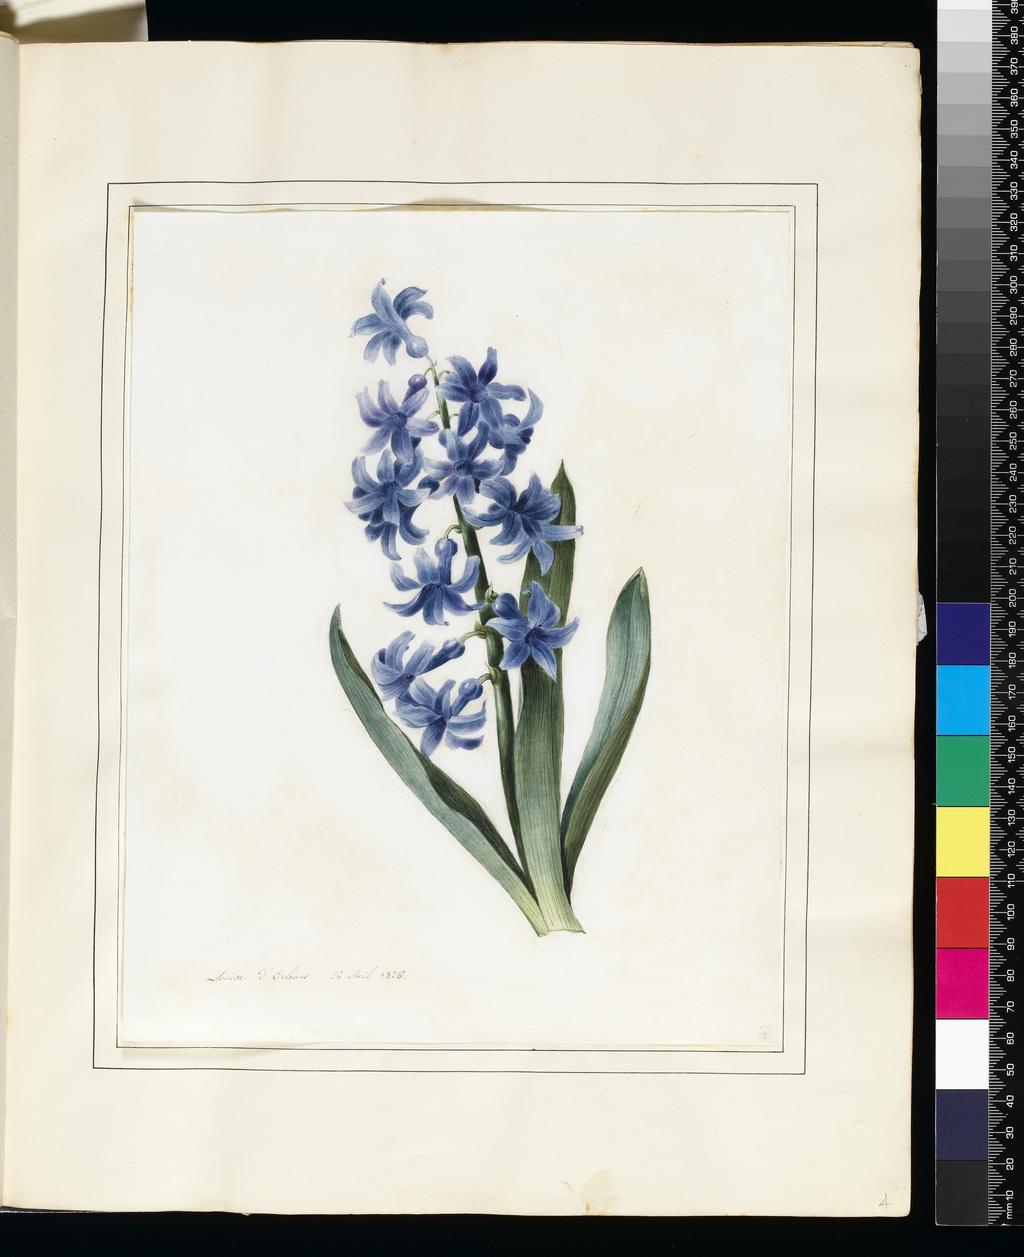 An image of Hyacinth. Louise d'Orleans (French, 1812-185?). Watercolour with some bodycolour on vellum. Height: 265 mm, width: 209 mm. 1826.